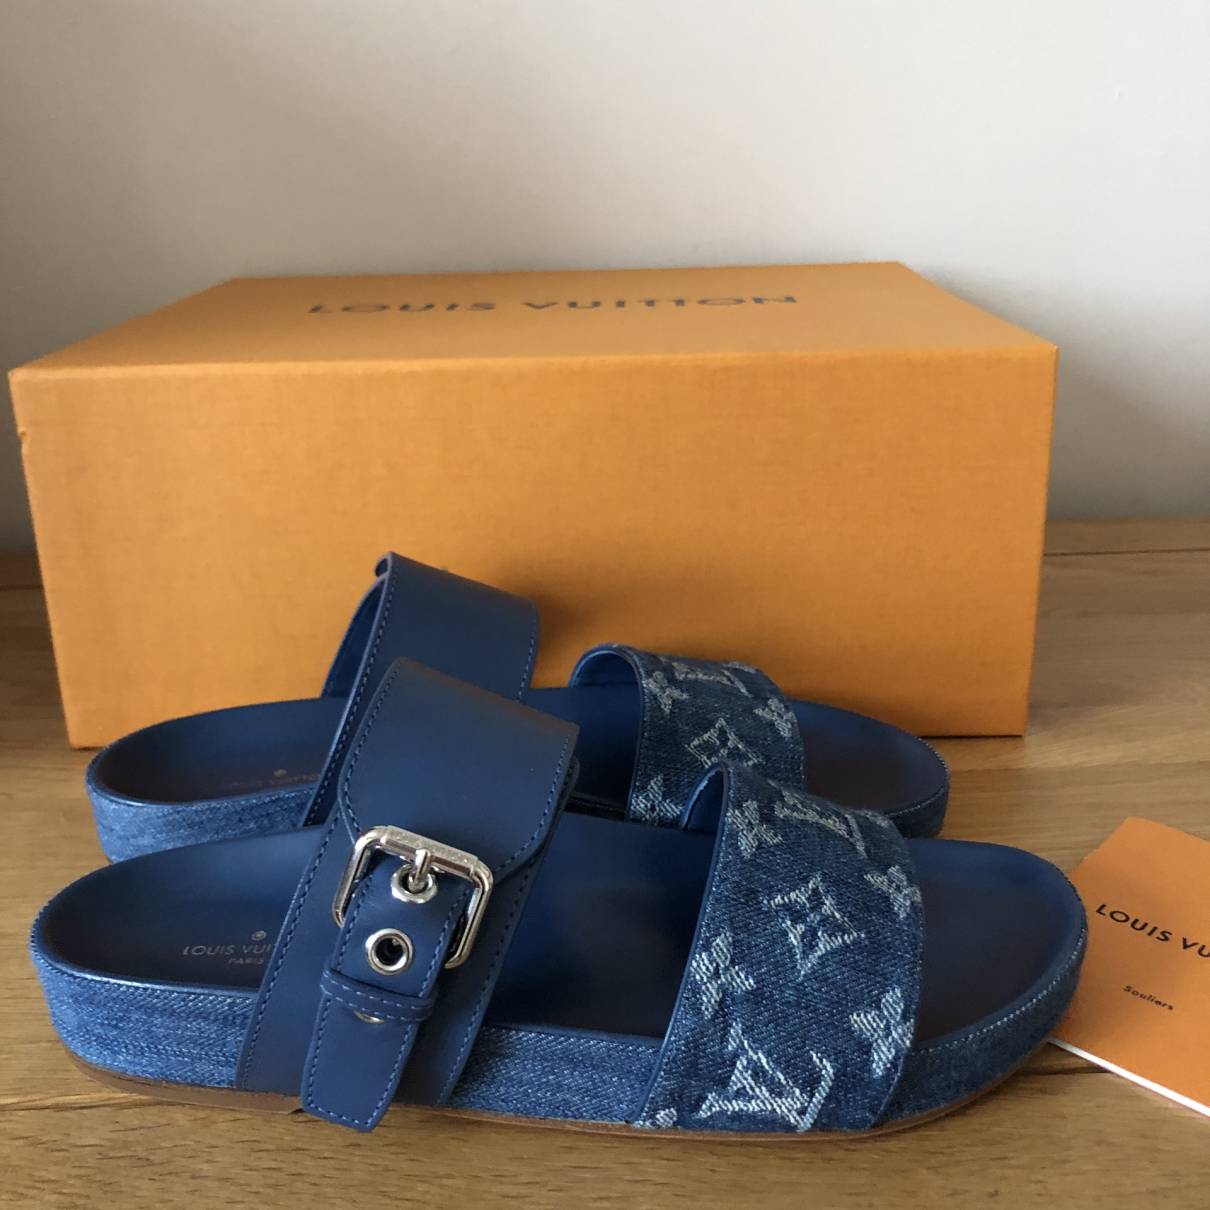 Louis Vuitton Monogrammed Mules in Blue